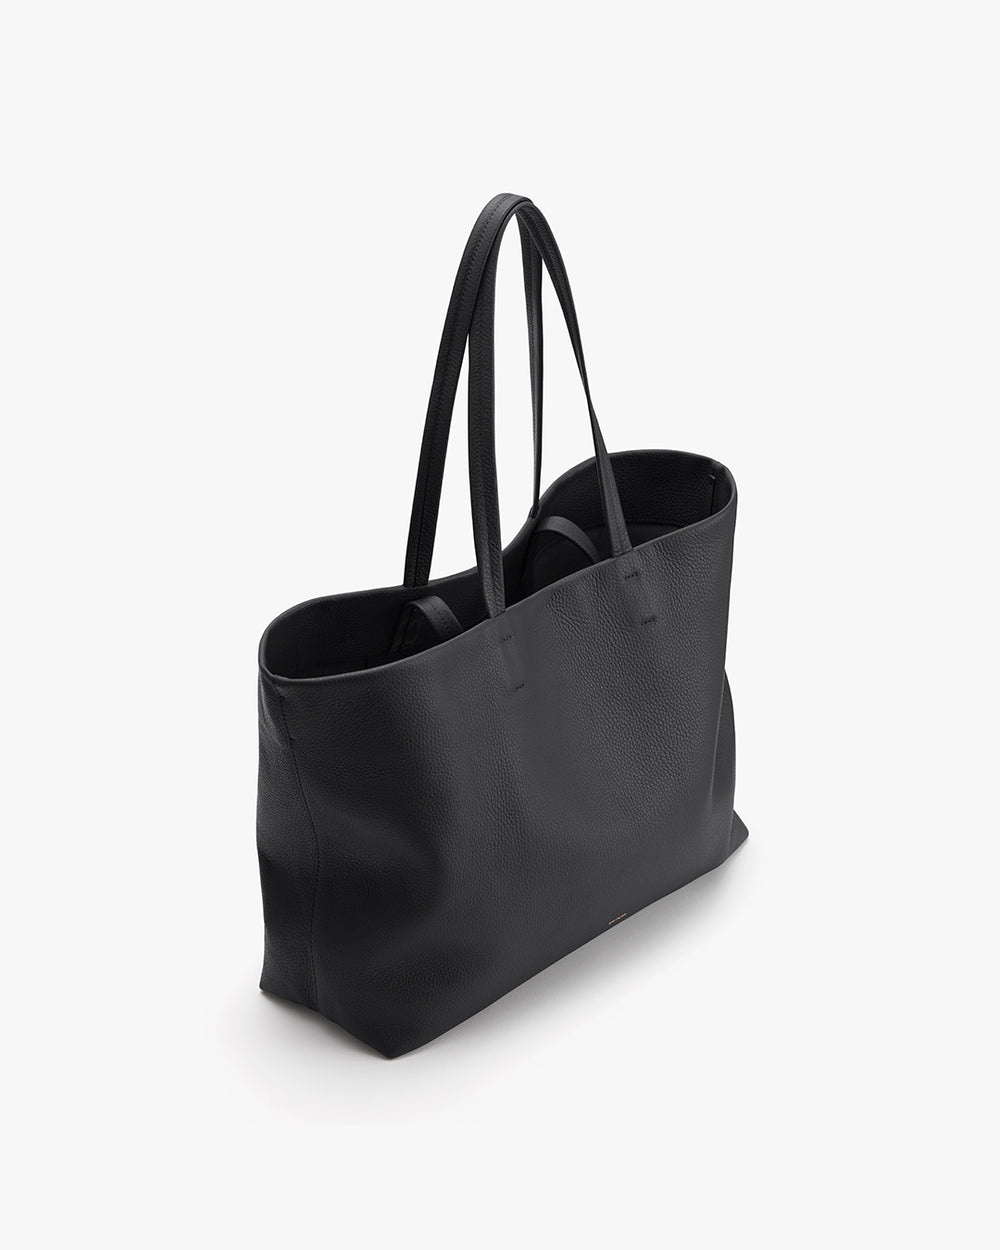 Extra LARGE Leather TOTE Bag With Pockets and ZIPPER / Black Personalised  Laptop Bag 